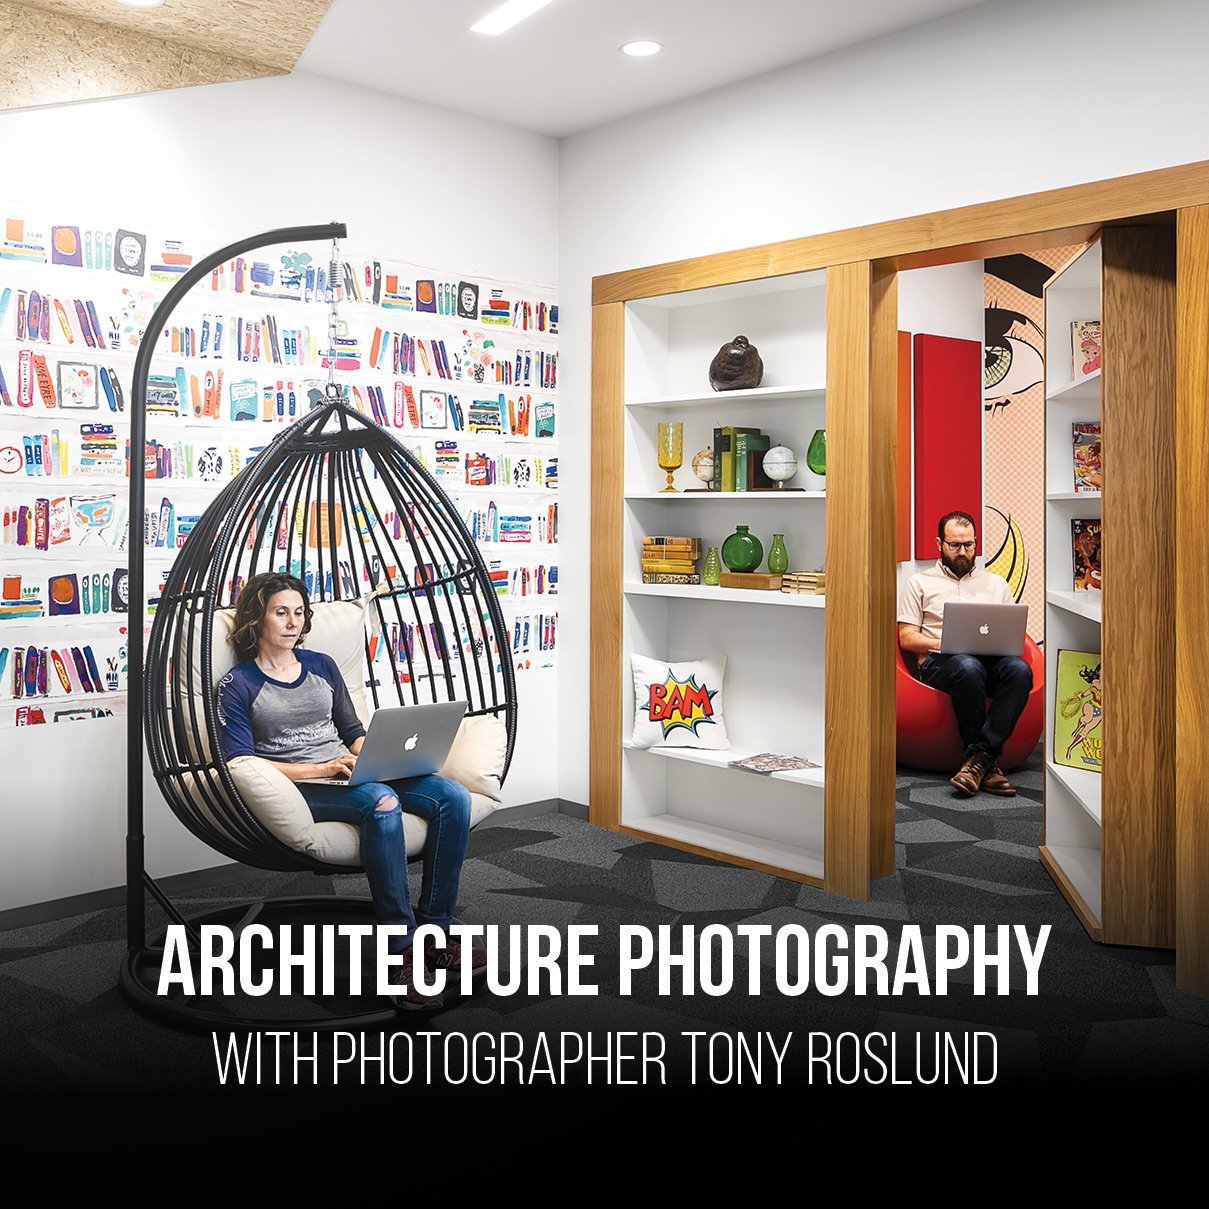 architecture photography tutorial poster from pro edu